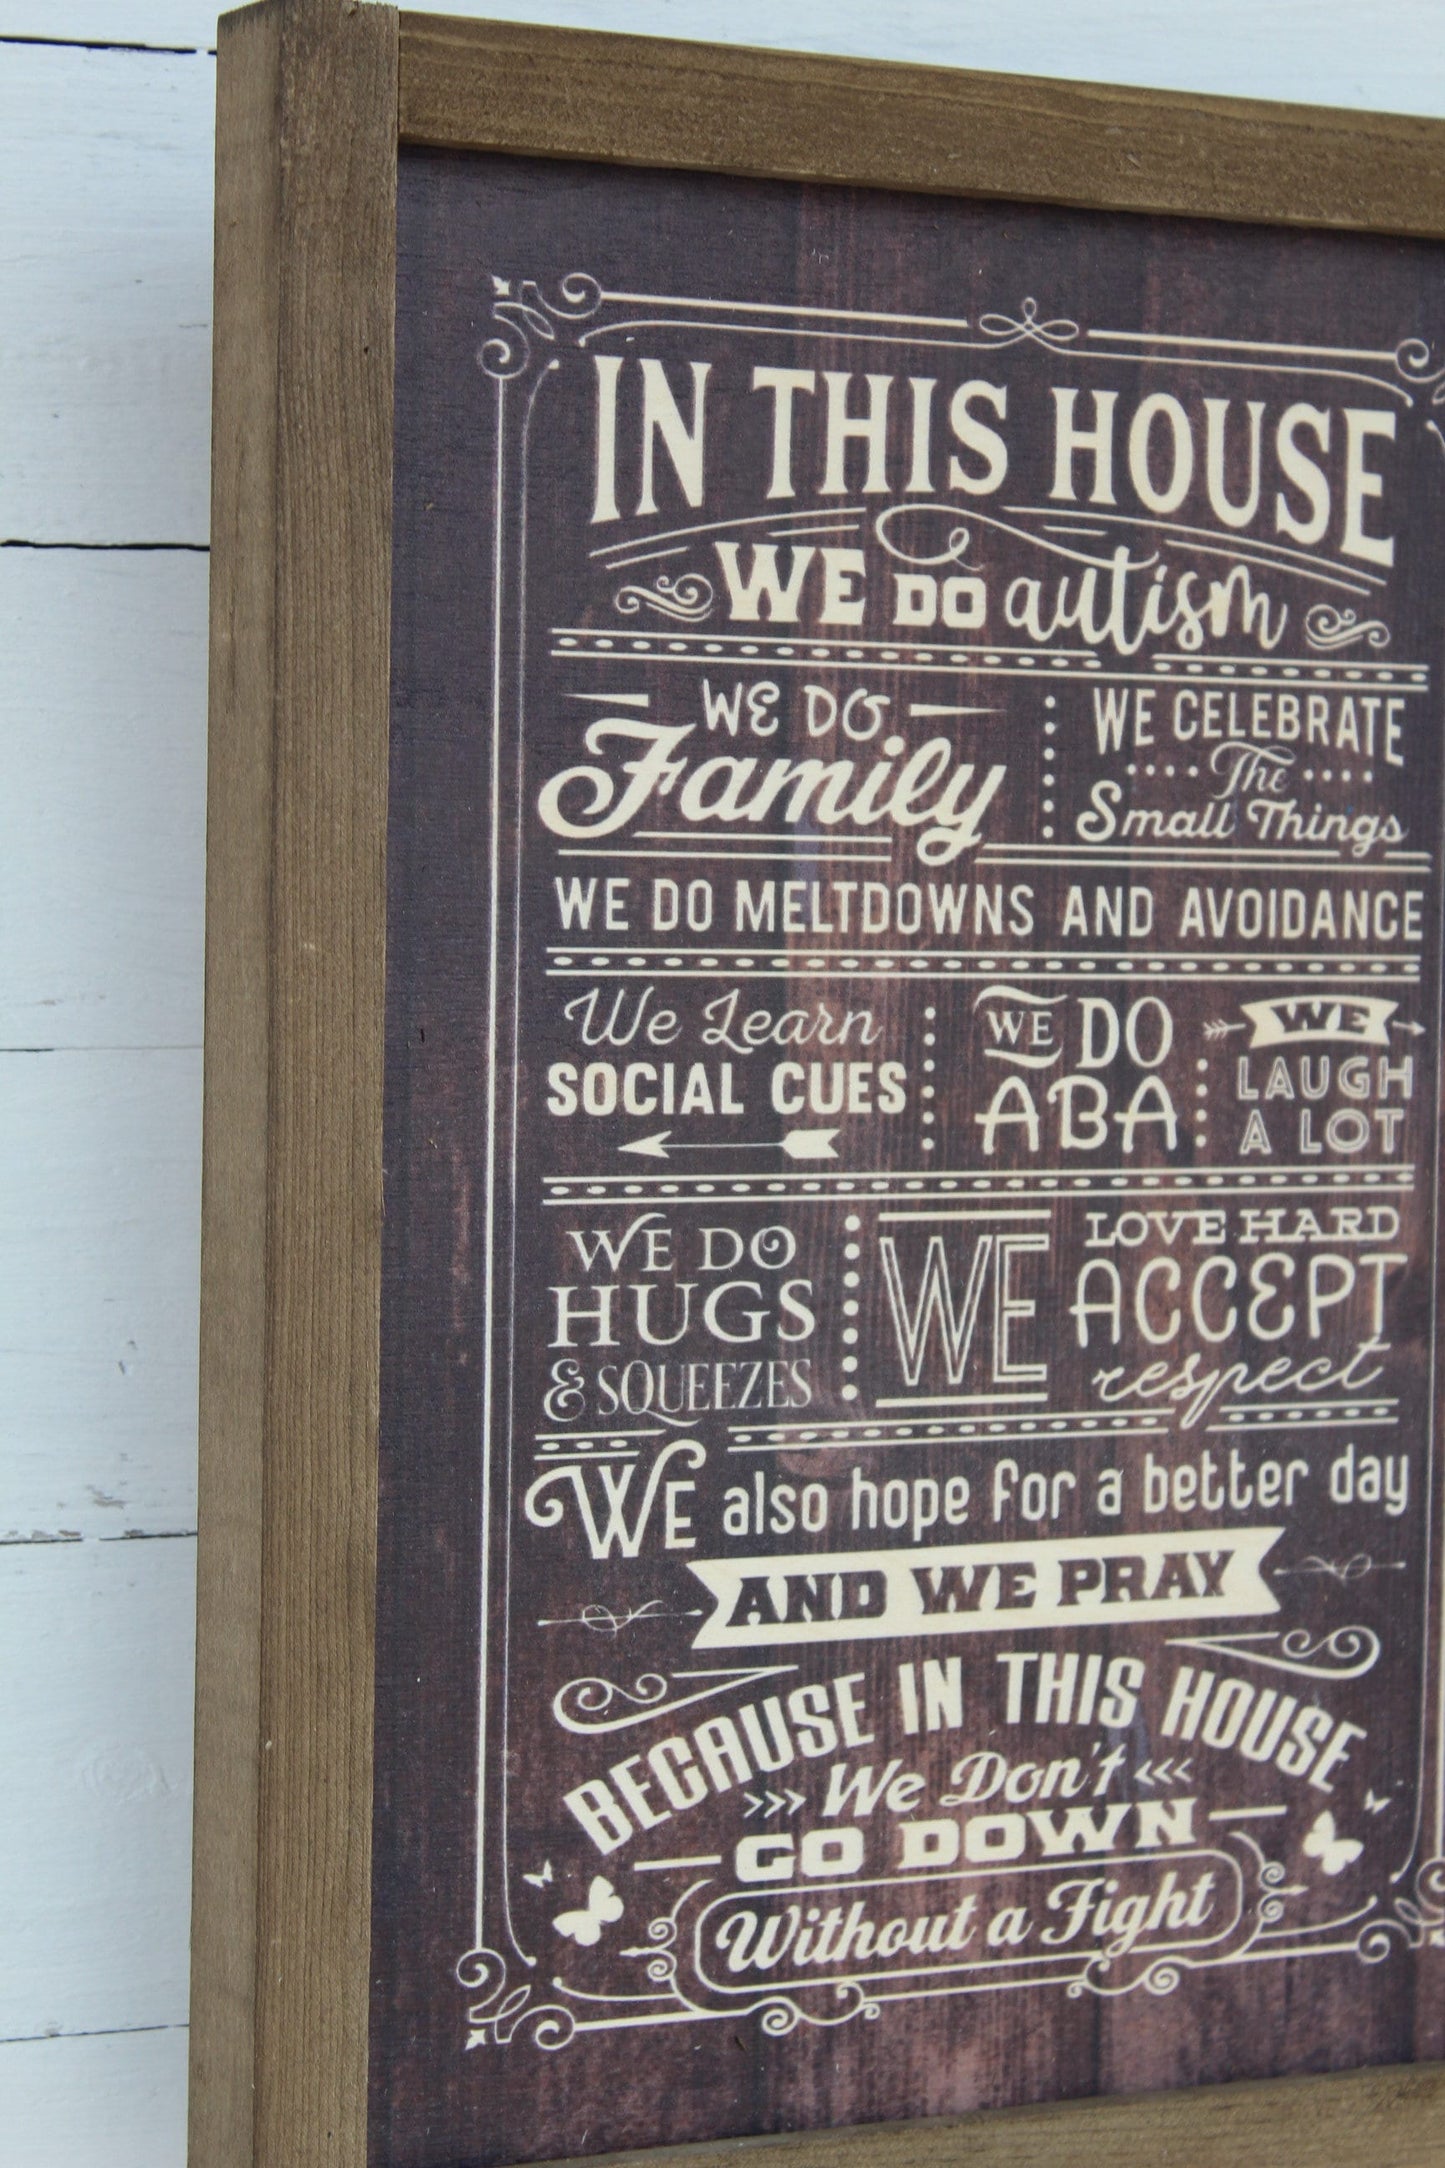 In This House We Do Autism Wood Sign Family Social Cues Celebrate ABA Hugs Prayer Wall Art Print Rustic Pallet Wood Hugs Love Meltdowns